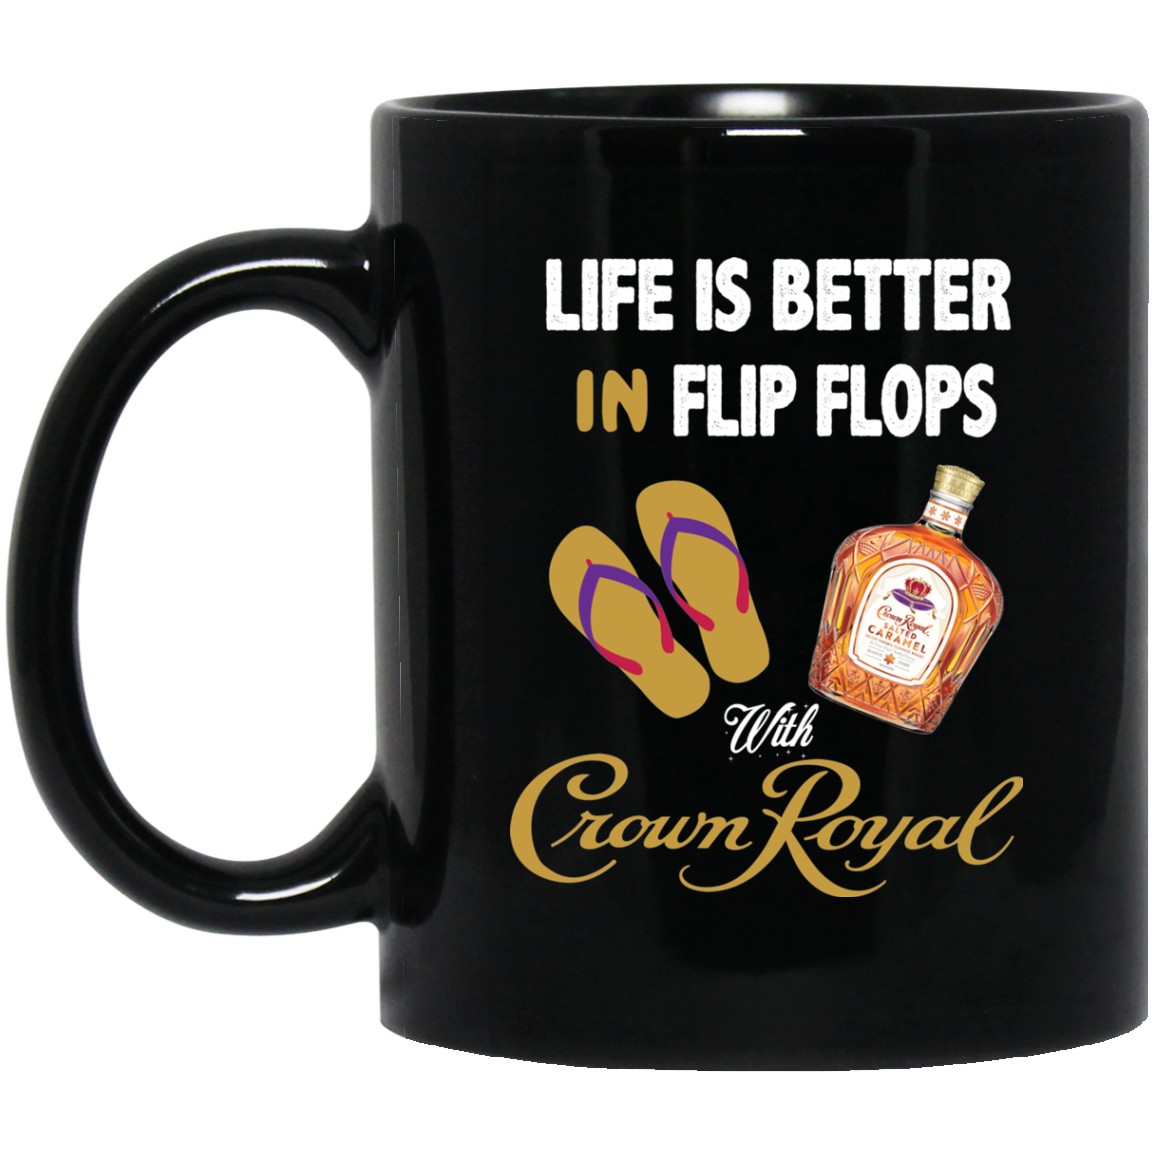 Life Is Better In Flip Flops With Crown Royal Coffee Mug